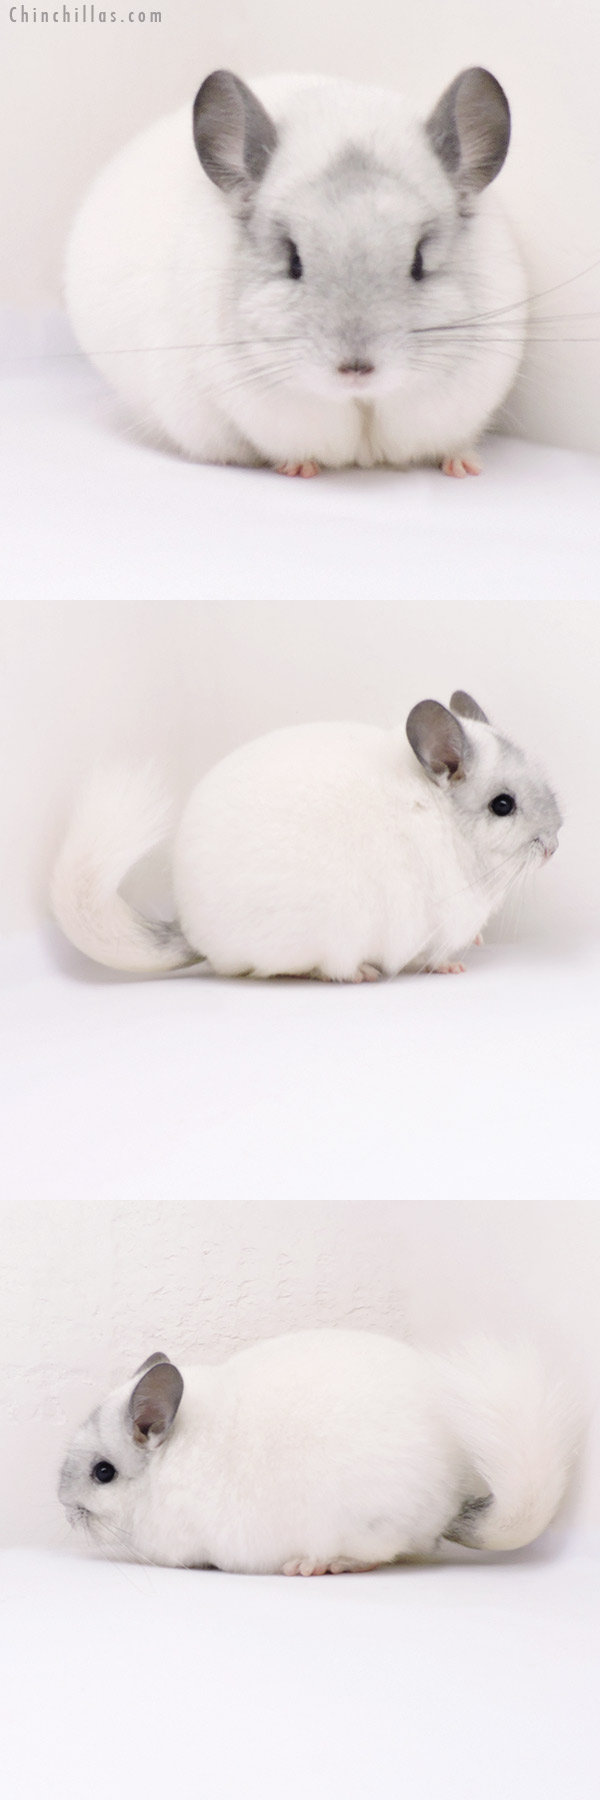 Chinchilla or related item offered for sale or export on Chinchillas.com - 19272 Blocky Premium Production Quality Predominately White Female Chinchilla